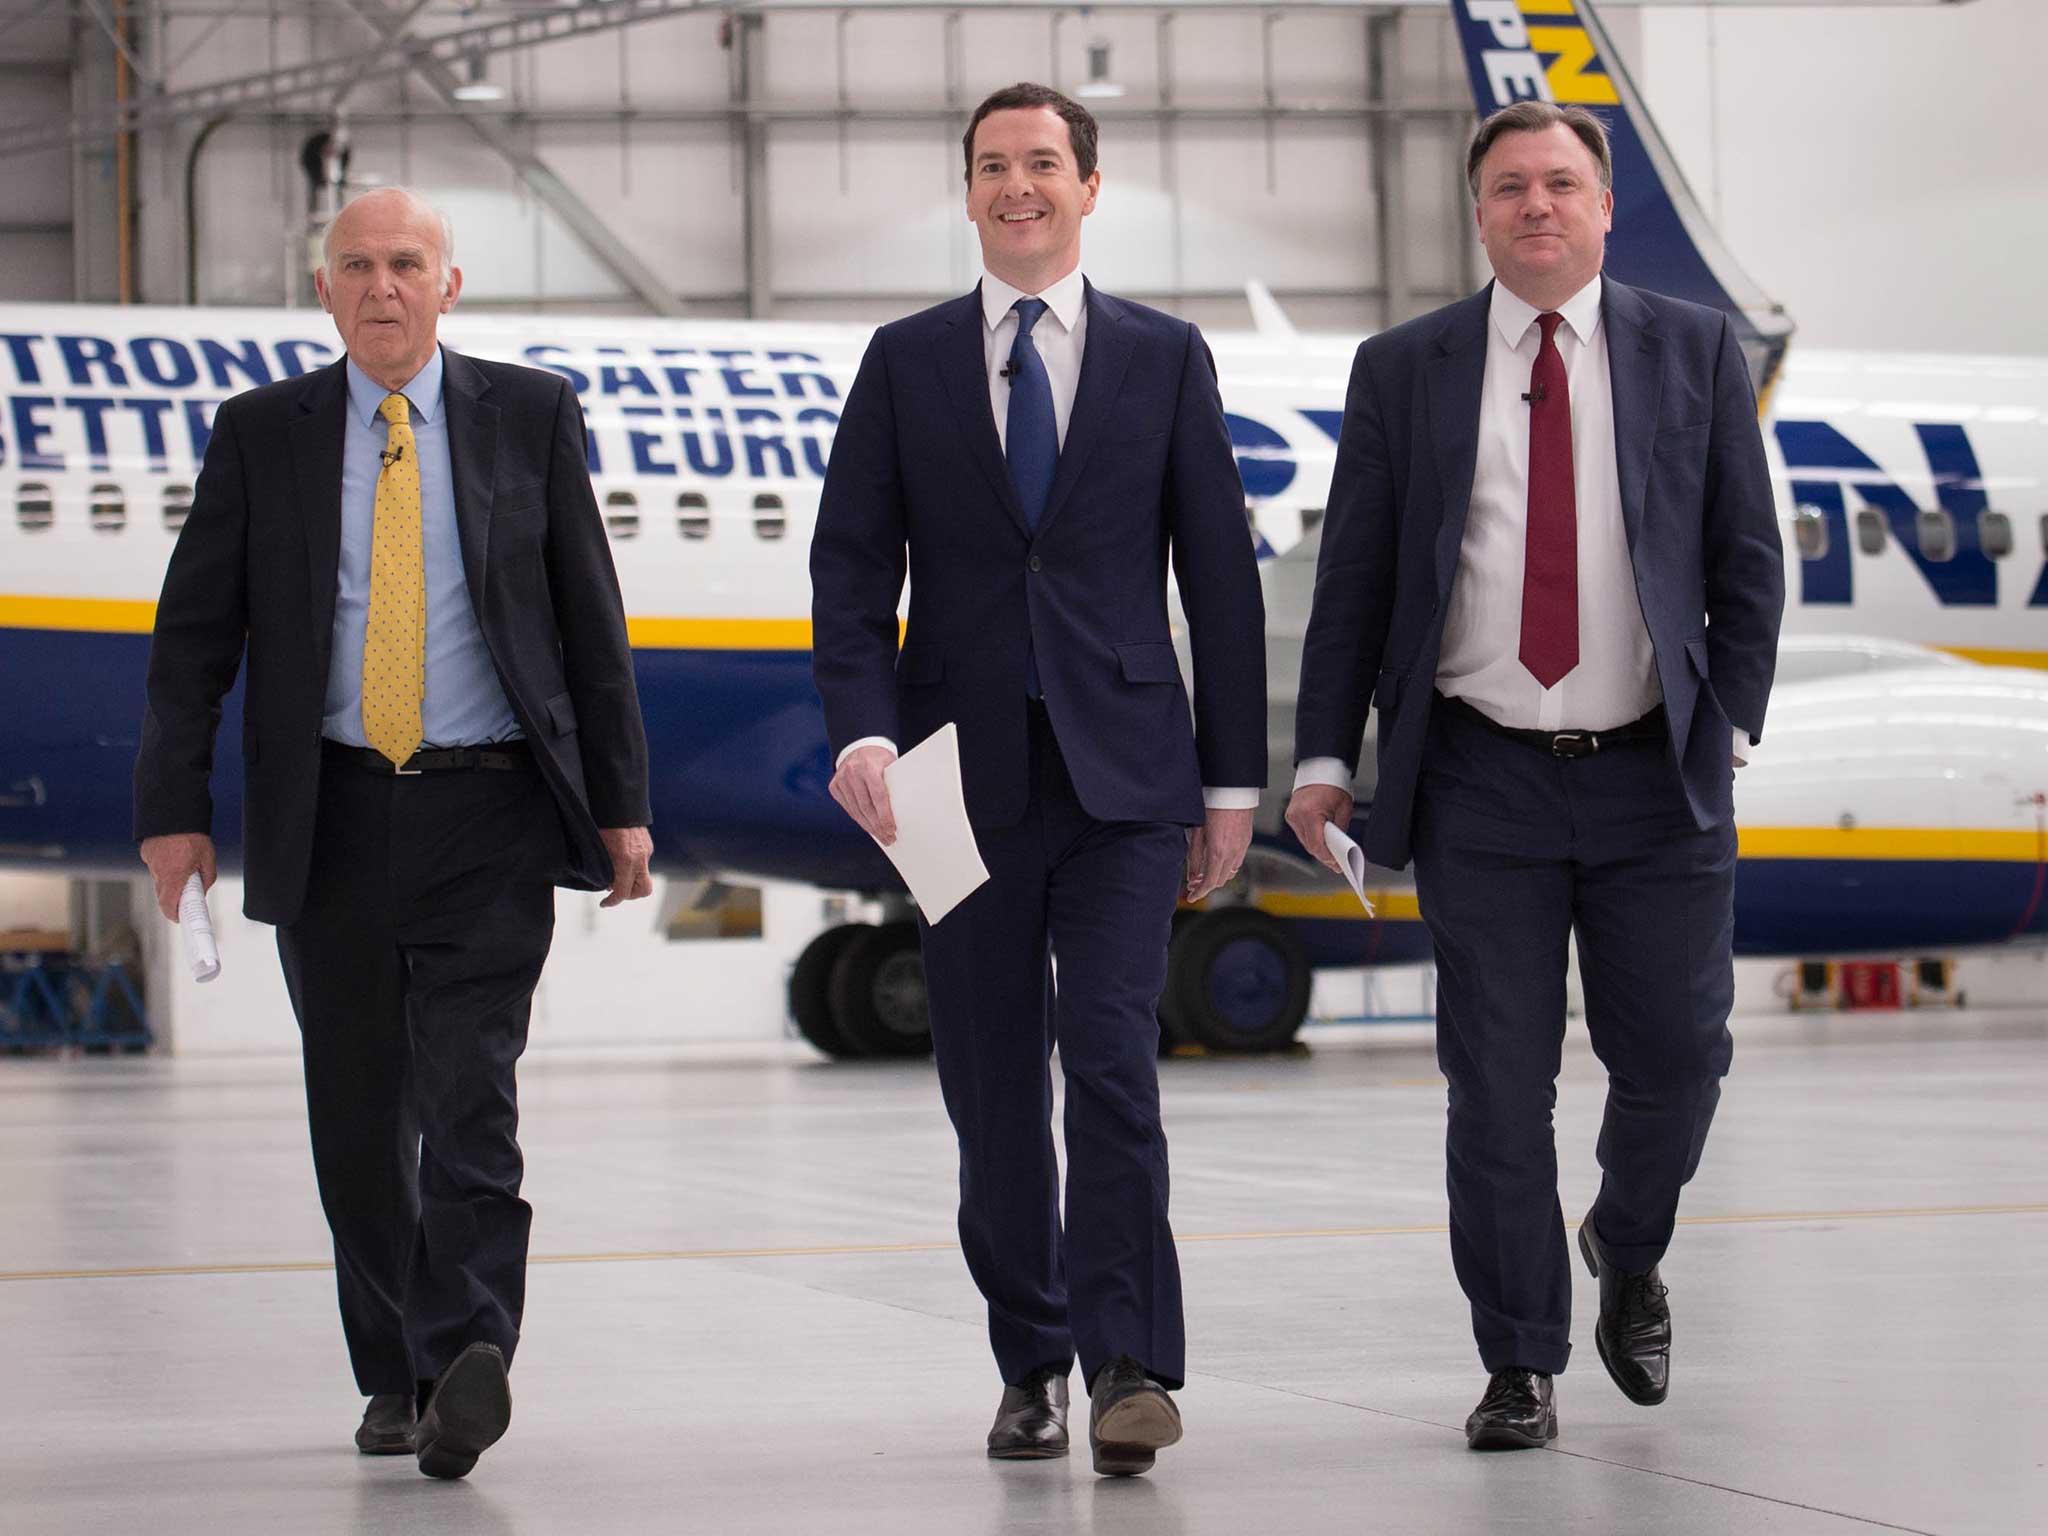 George Osborne is joined by former adversaries Ed Balls and Sir Vince Cable, in the Ryanair hangar at Stansted Airport, where he said that 450 jobs and almost £1 billion in investment announced by Ryanair would be "at risk if we left the EU"